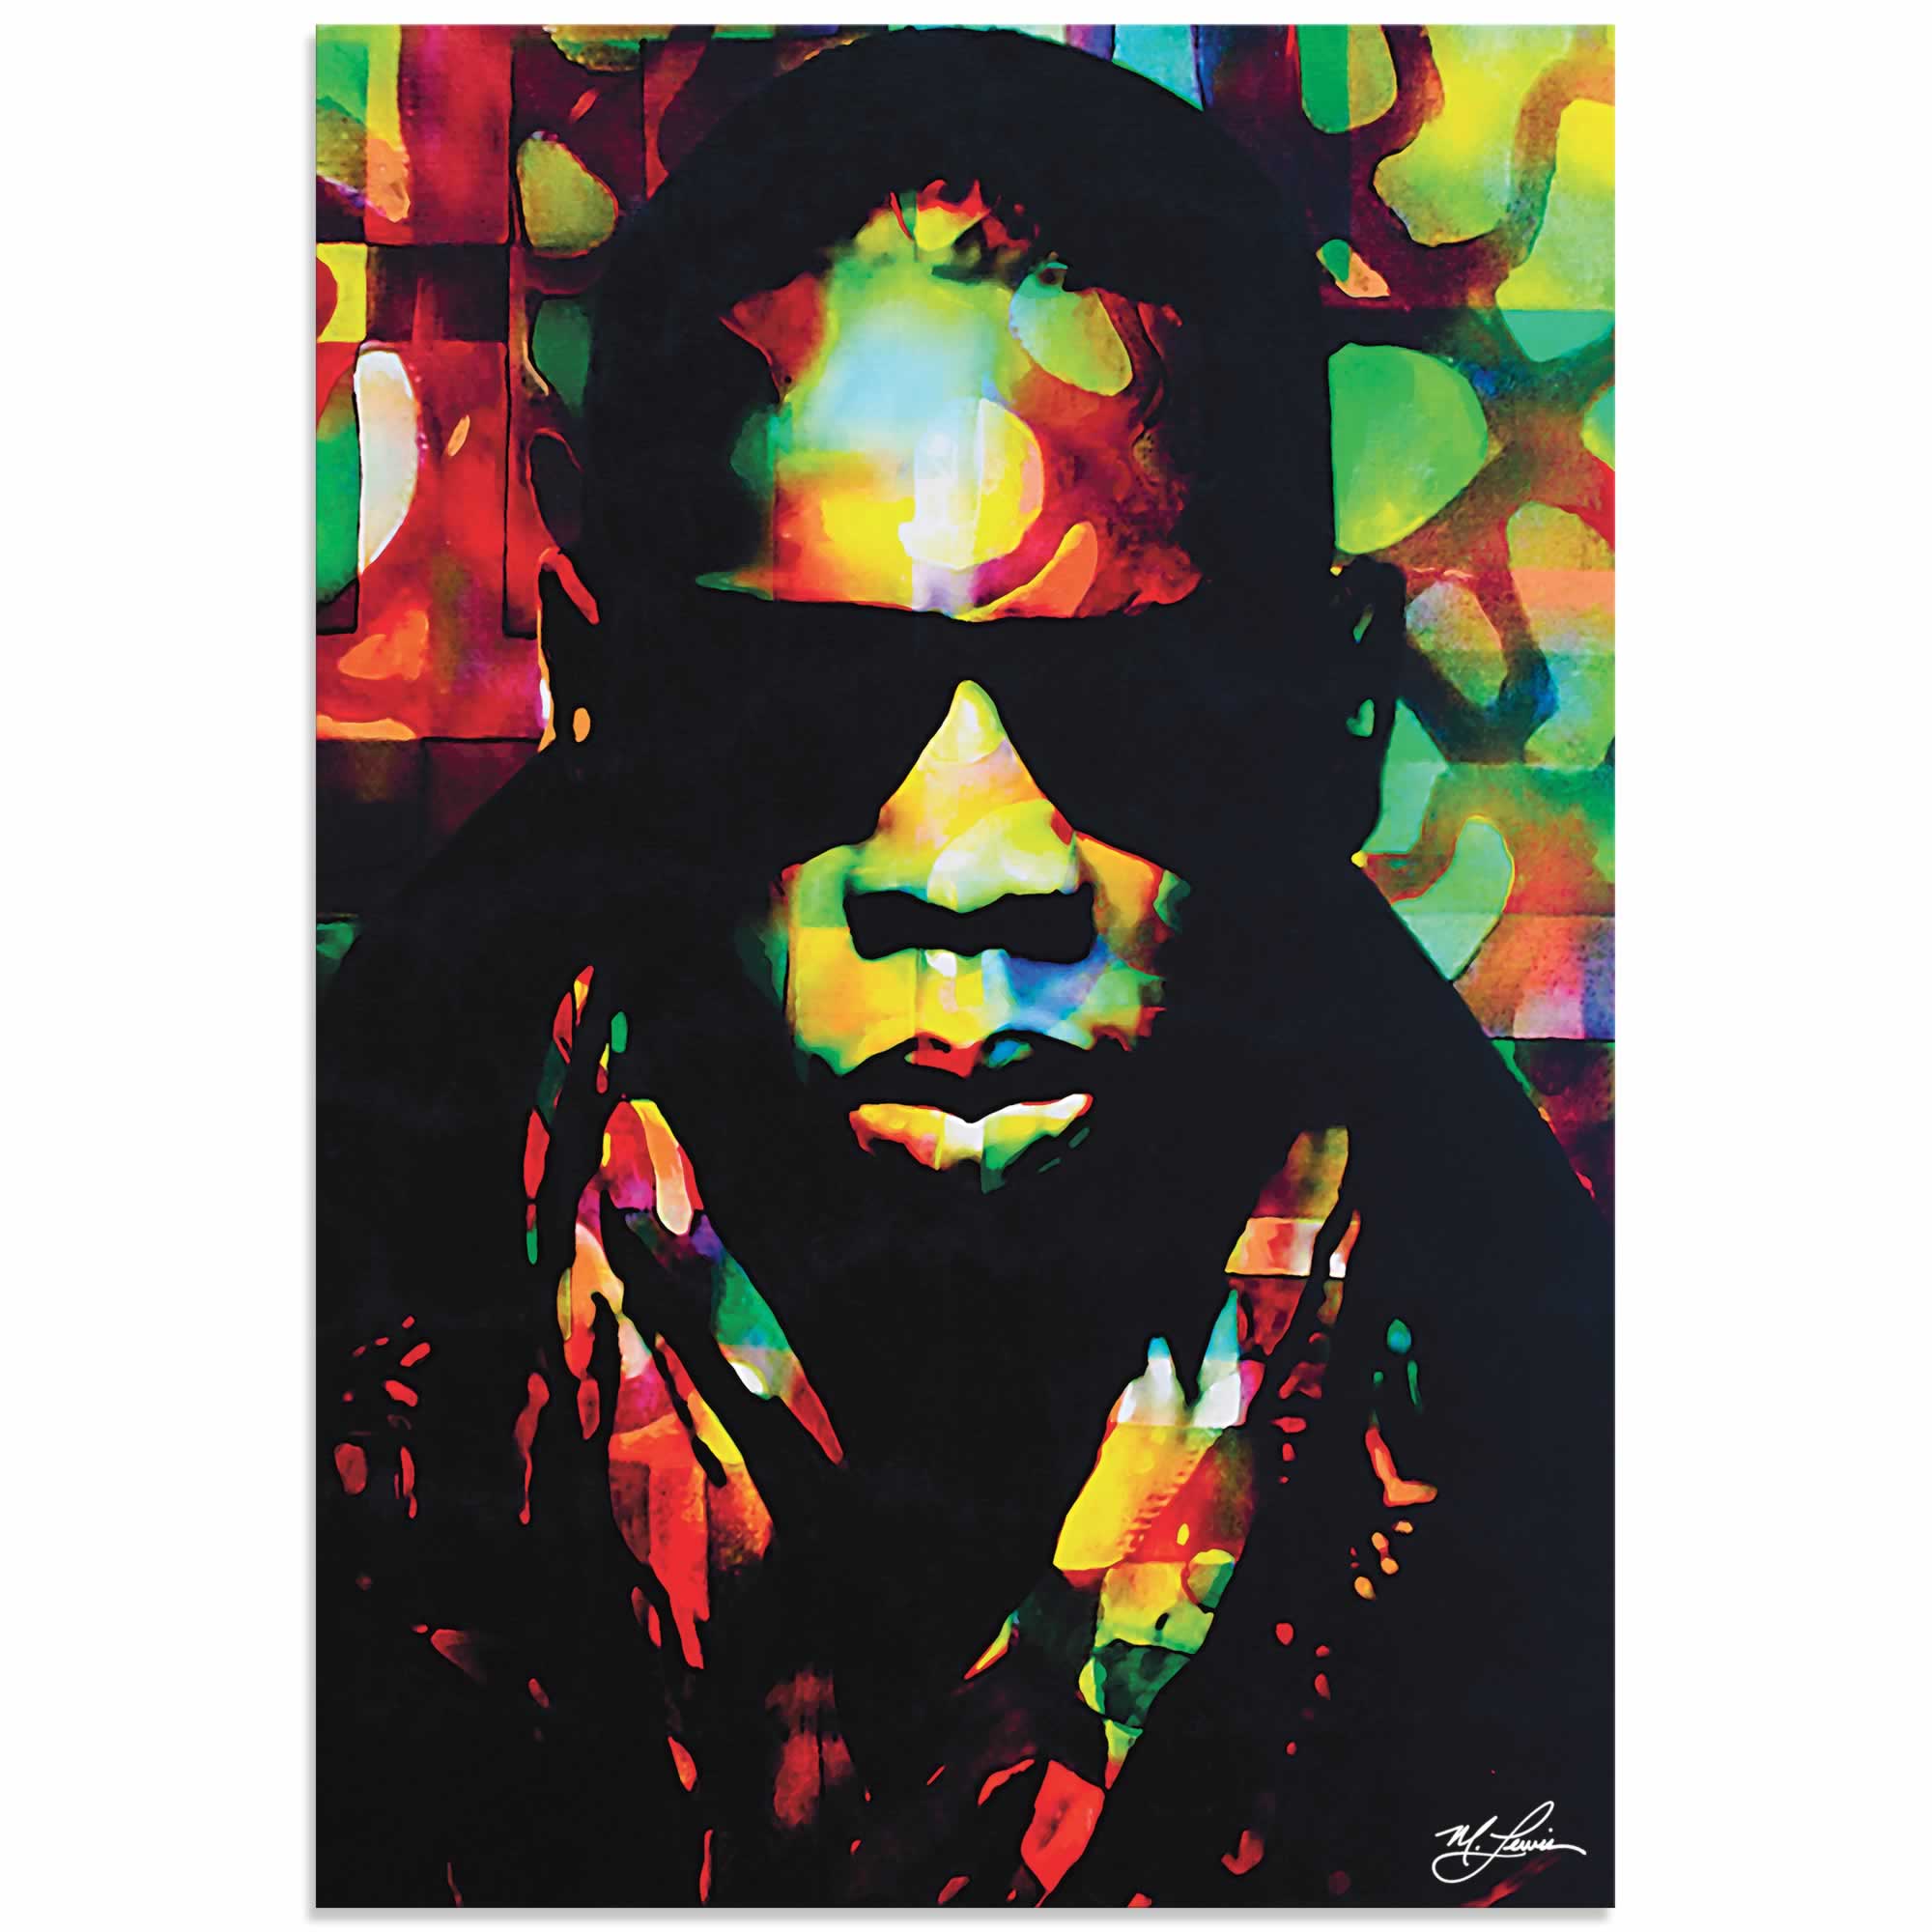 Jay Z Color of a CEO | Pop Art Painting by Mark Lewis, Signed & Numbered Limited Edition 